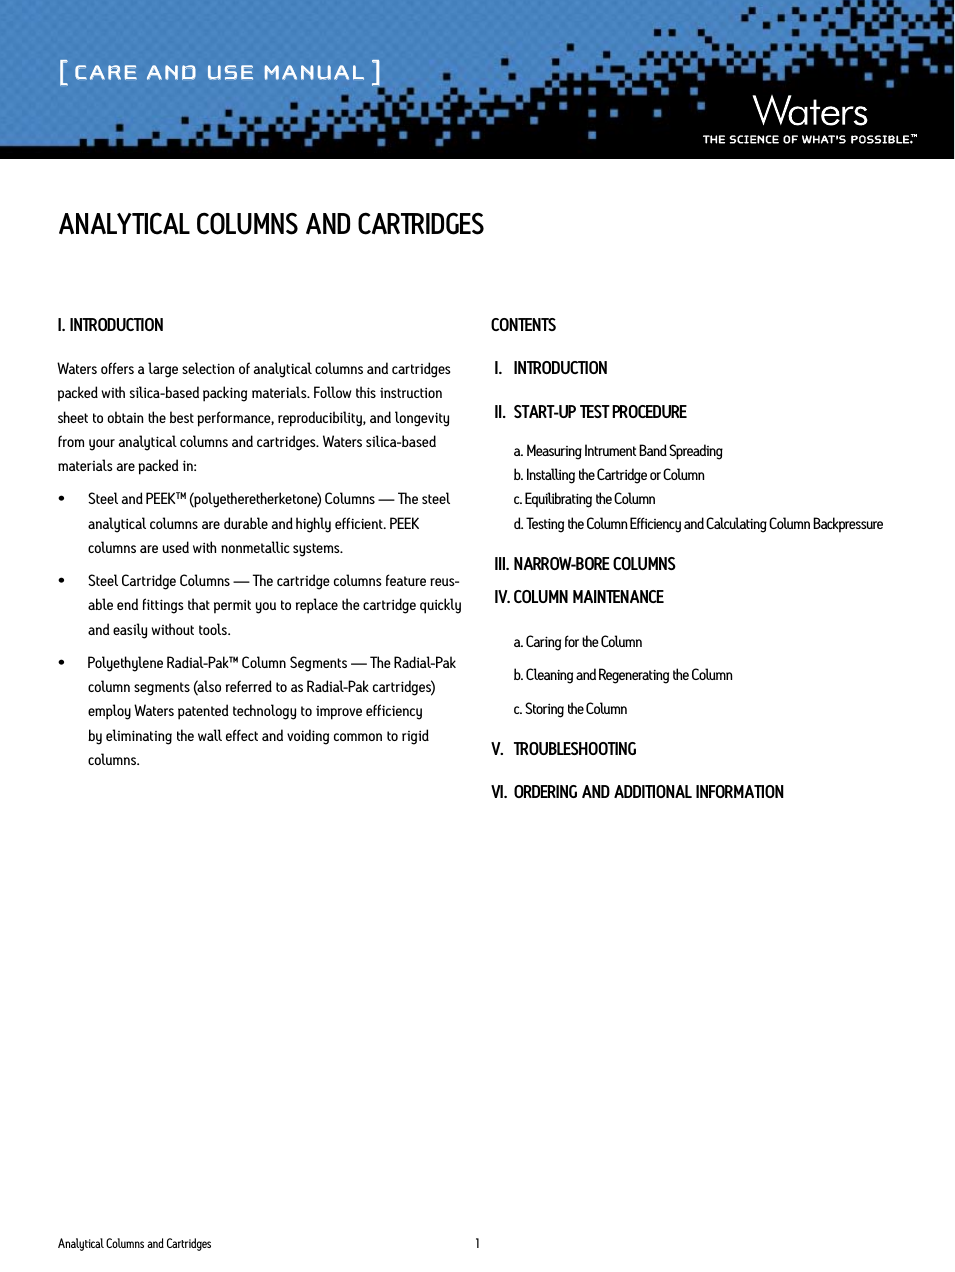 Analytical Columns and Cartridges